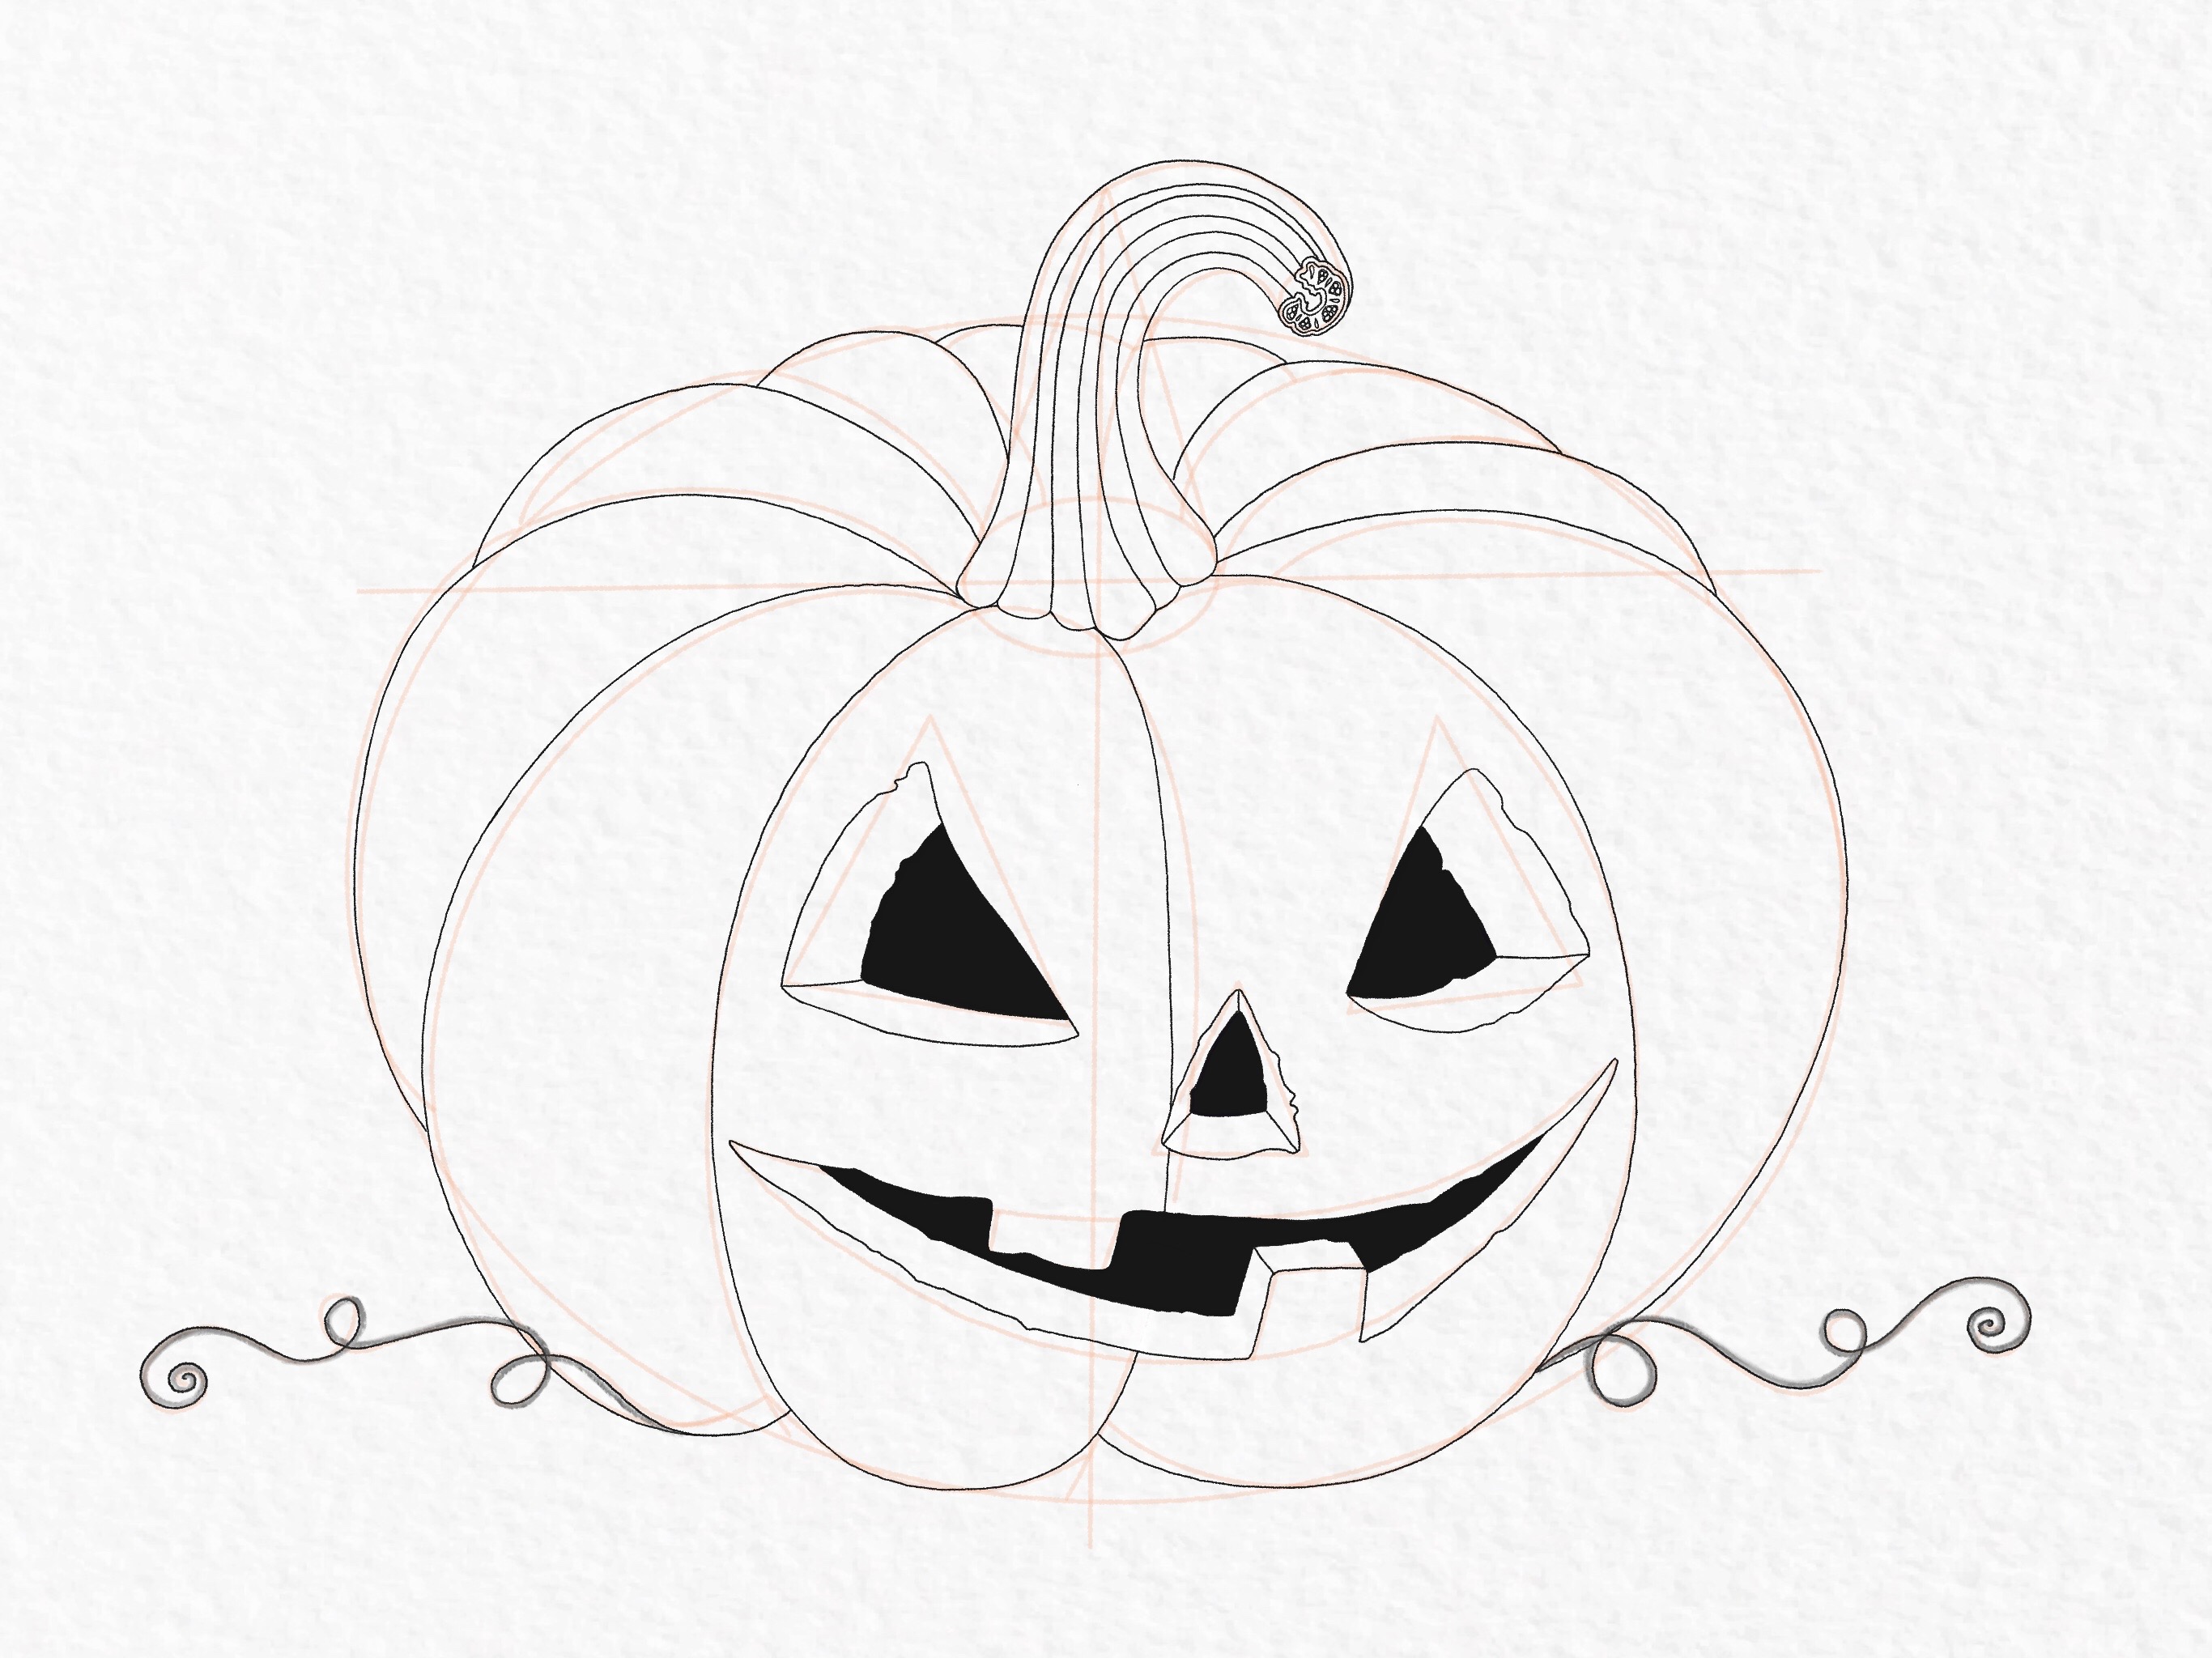 Halloween Pumpkins Drawing Pencil Drawing On Paper Background, Picture Of Pumpkin  Drawings, Pumpkin, Halloween Background Image And Wallpaper for Free  Download